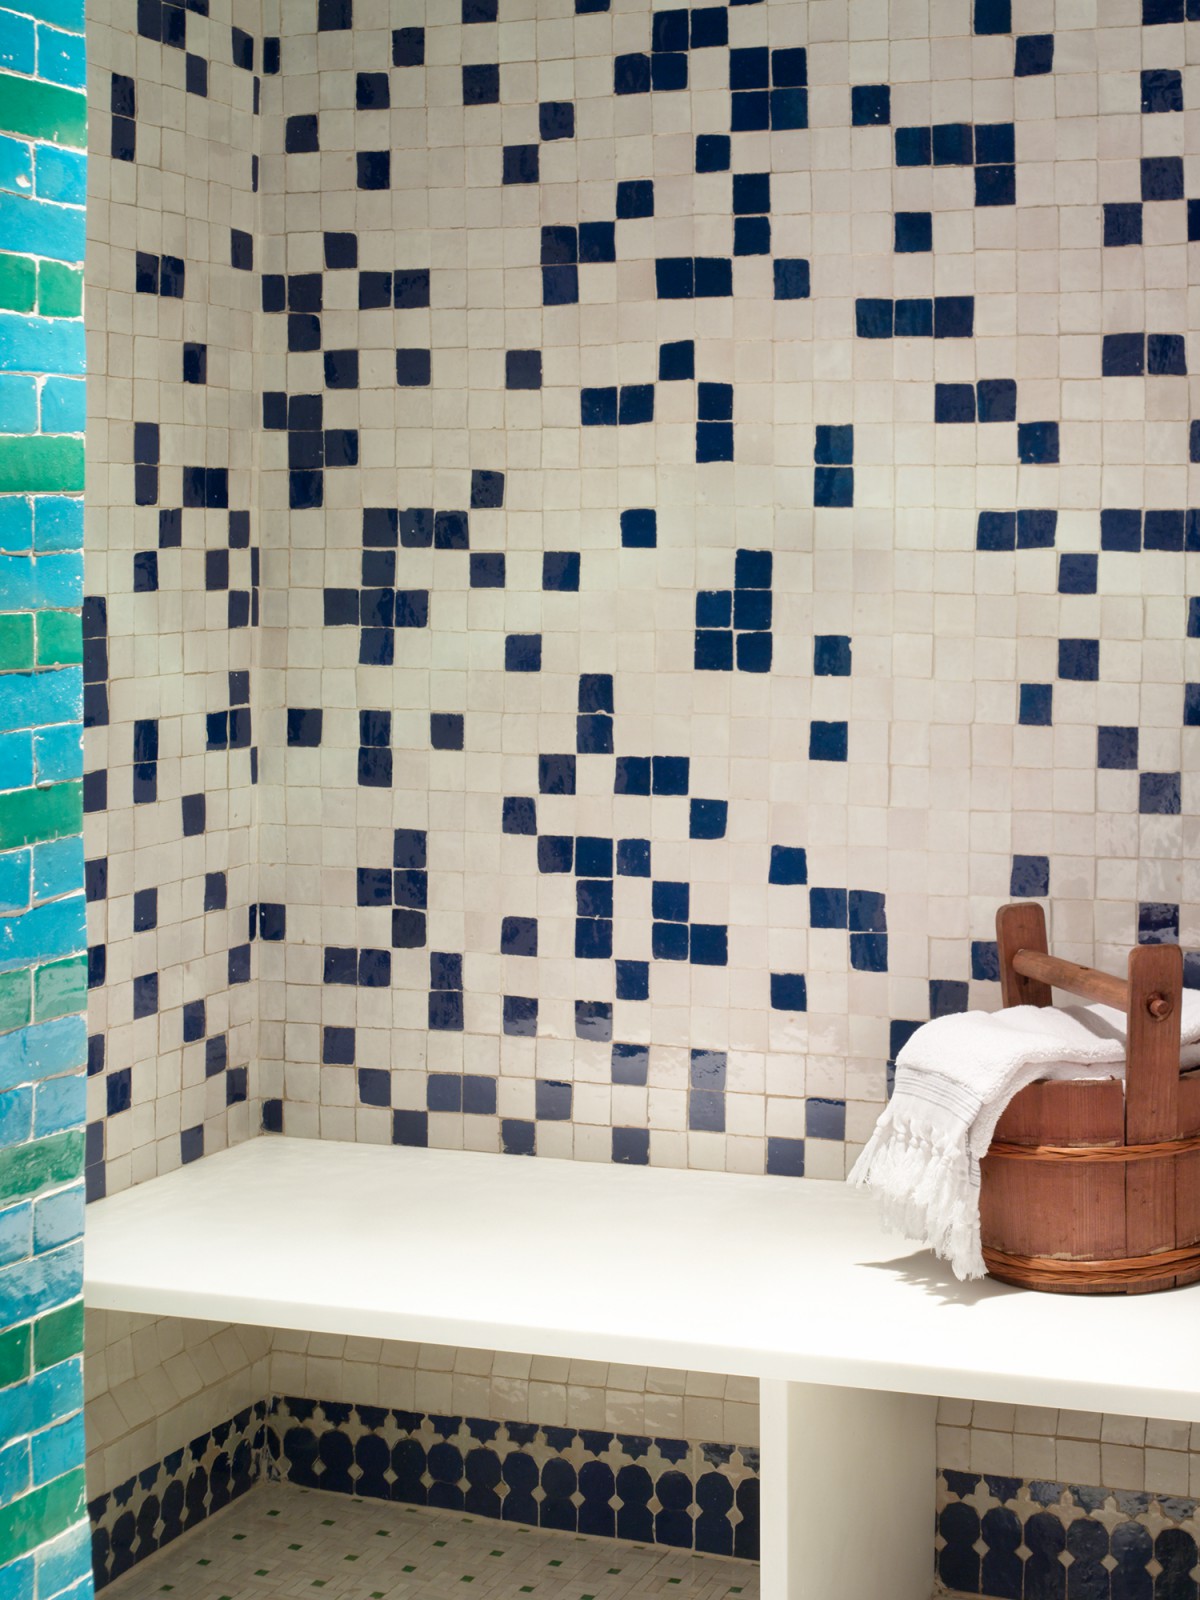 Detail of tile work in the N. Moore Penthouse spa